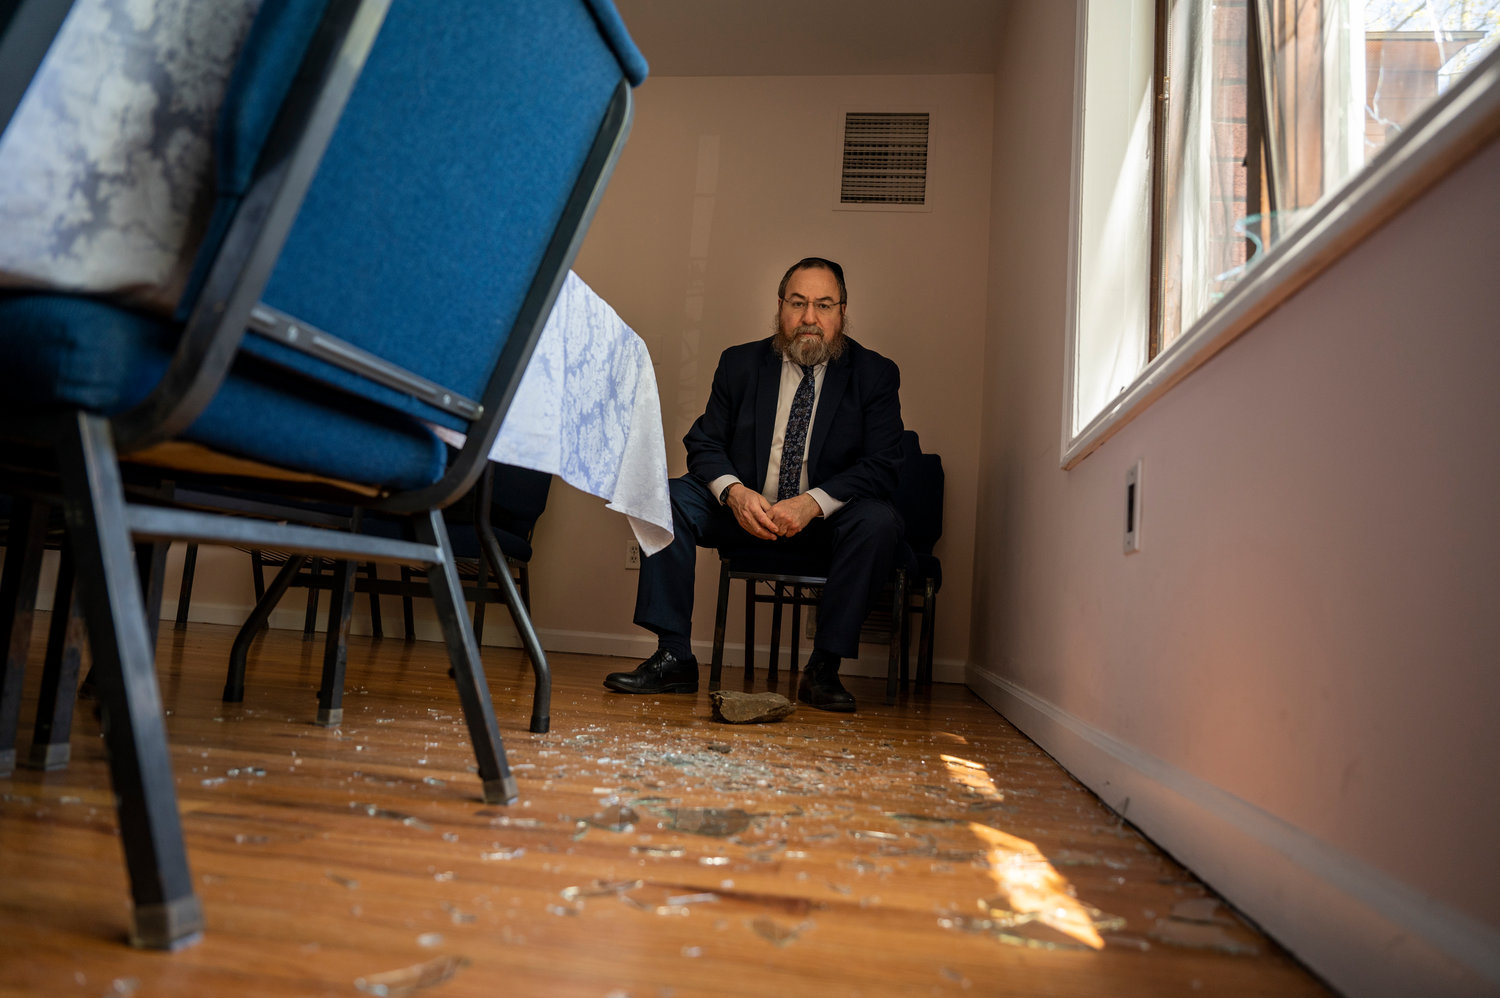 Rabbi Levi Shemtov says he’s very disturbed by the vandalism of his synagogue, Chabad Lubavitch of Riverdale, over the weekend. Shemtov’s shul was one of four targeted by a person police suspects smashed windows with rocks.